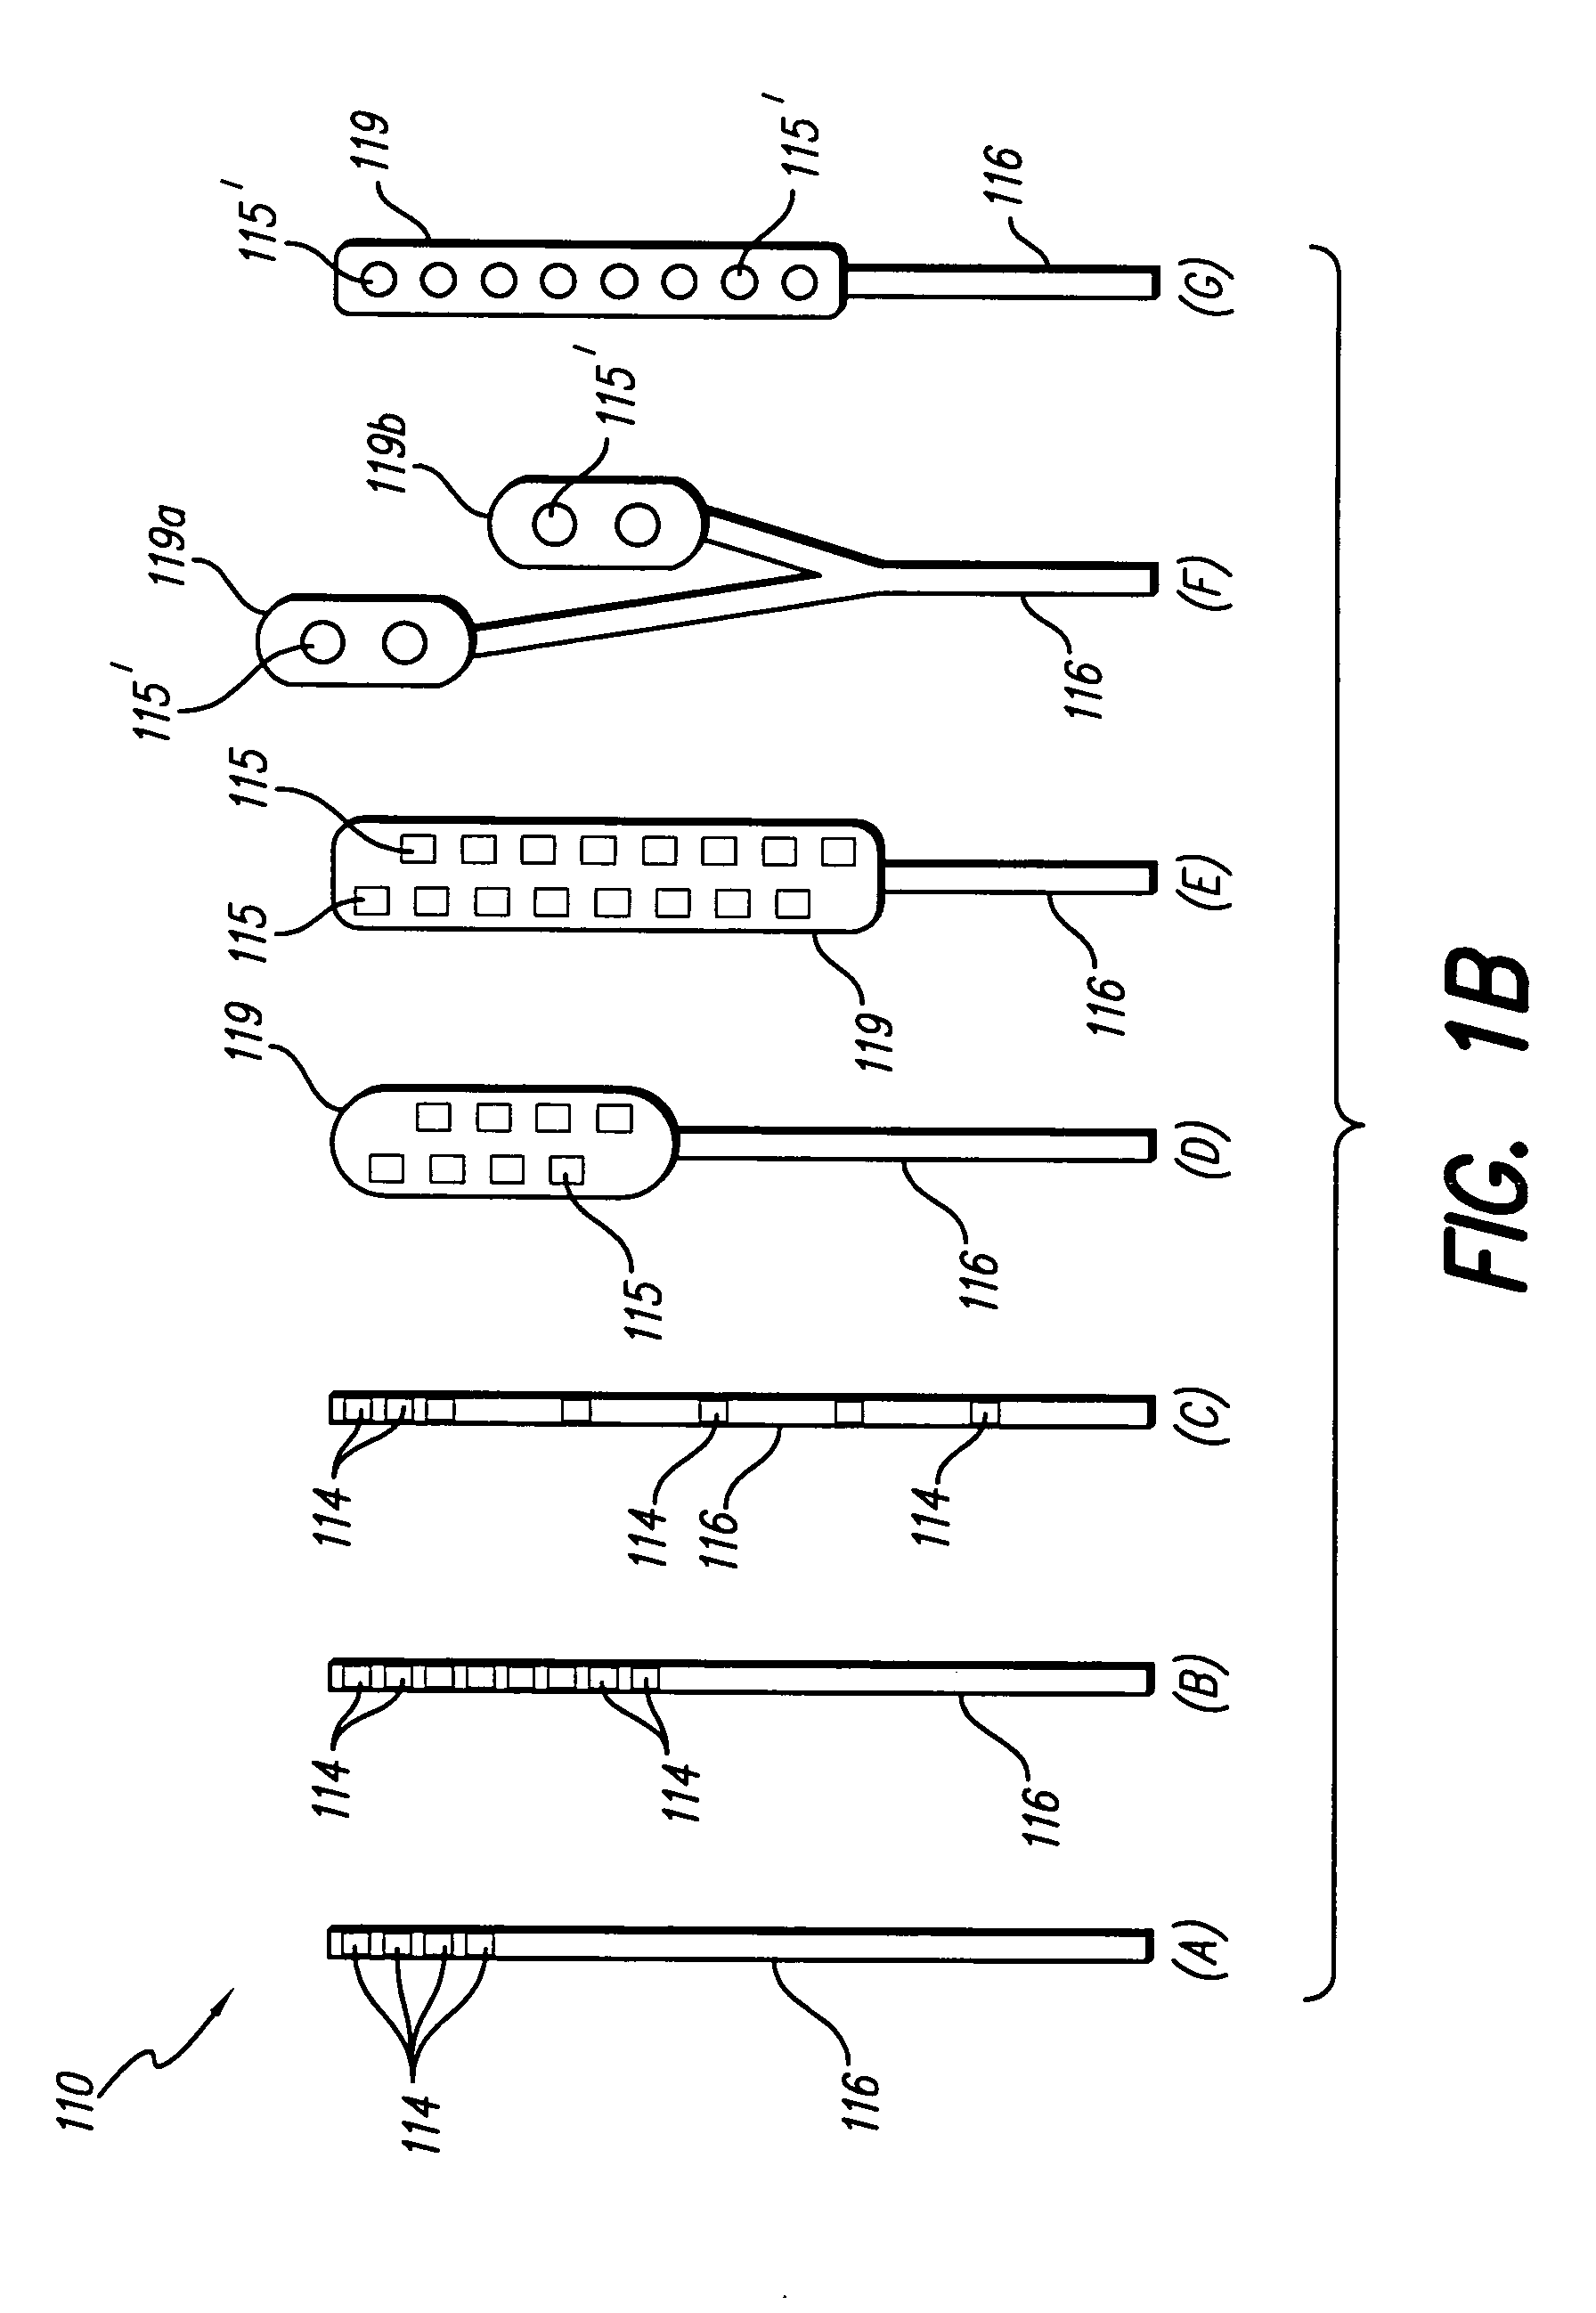 Switched-matrix output for multi-channel implantable stimulator